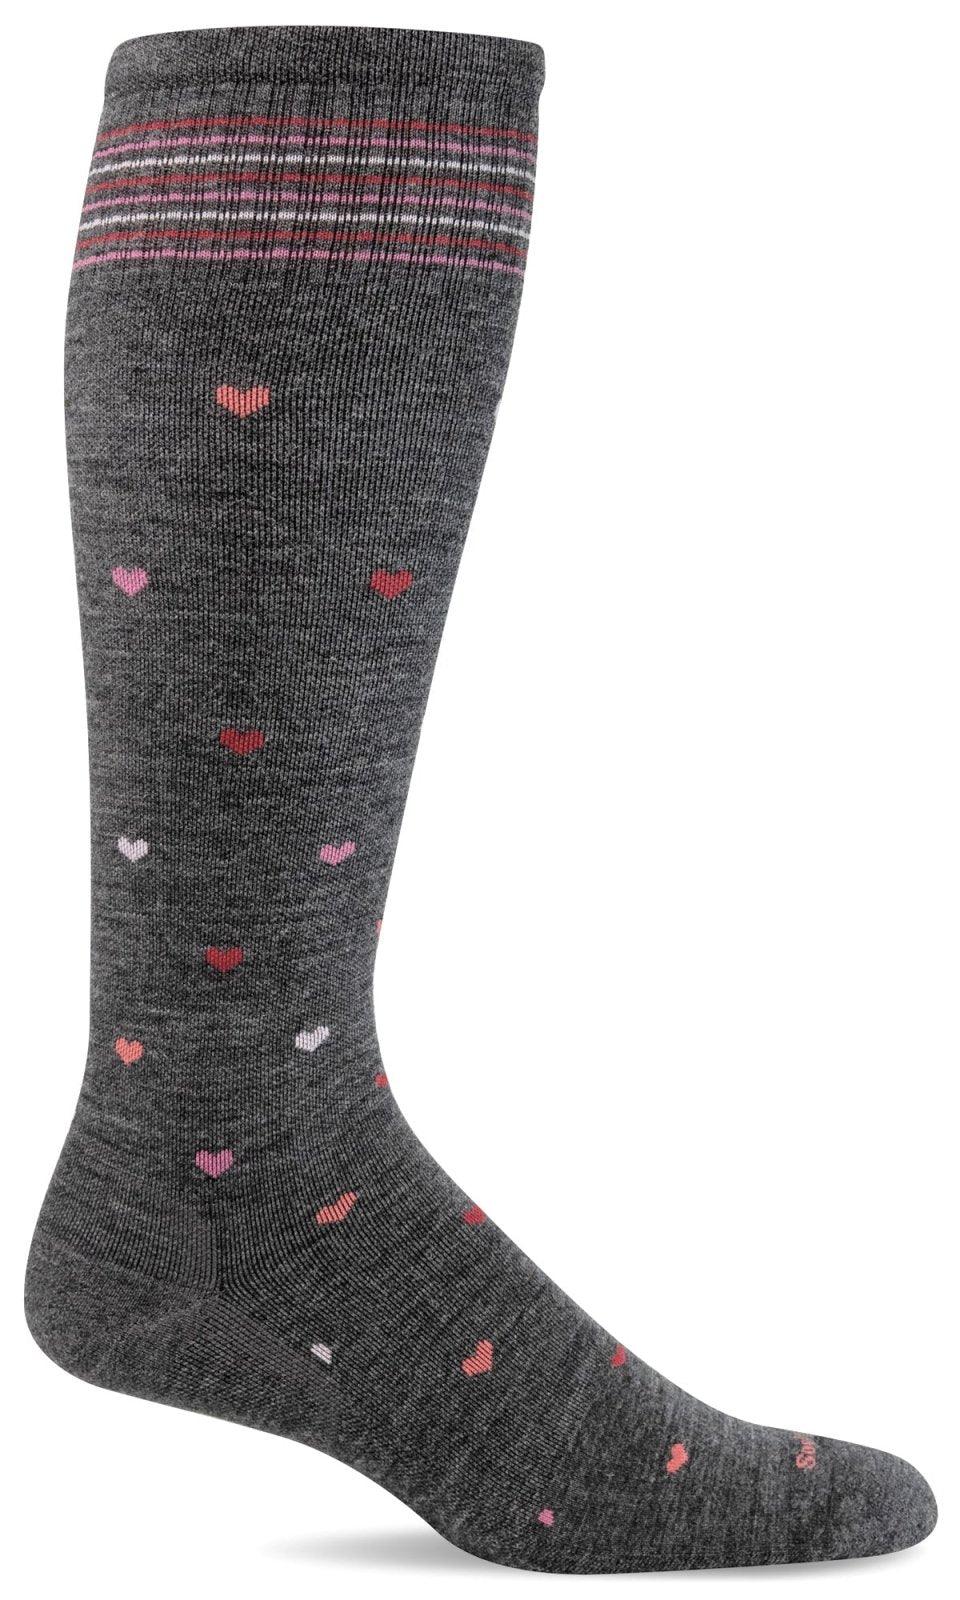 Full Heart | Wide Calf Fit | Moderate Knee-high Compression - Sockwell - The Sock Monster